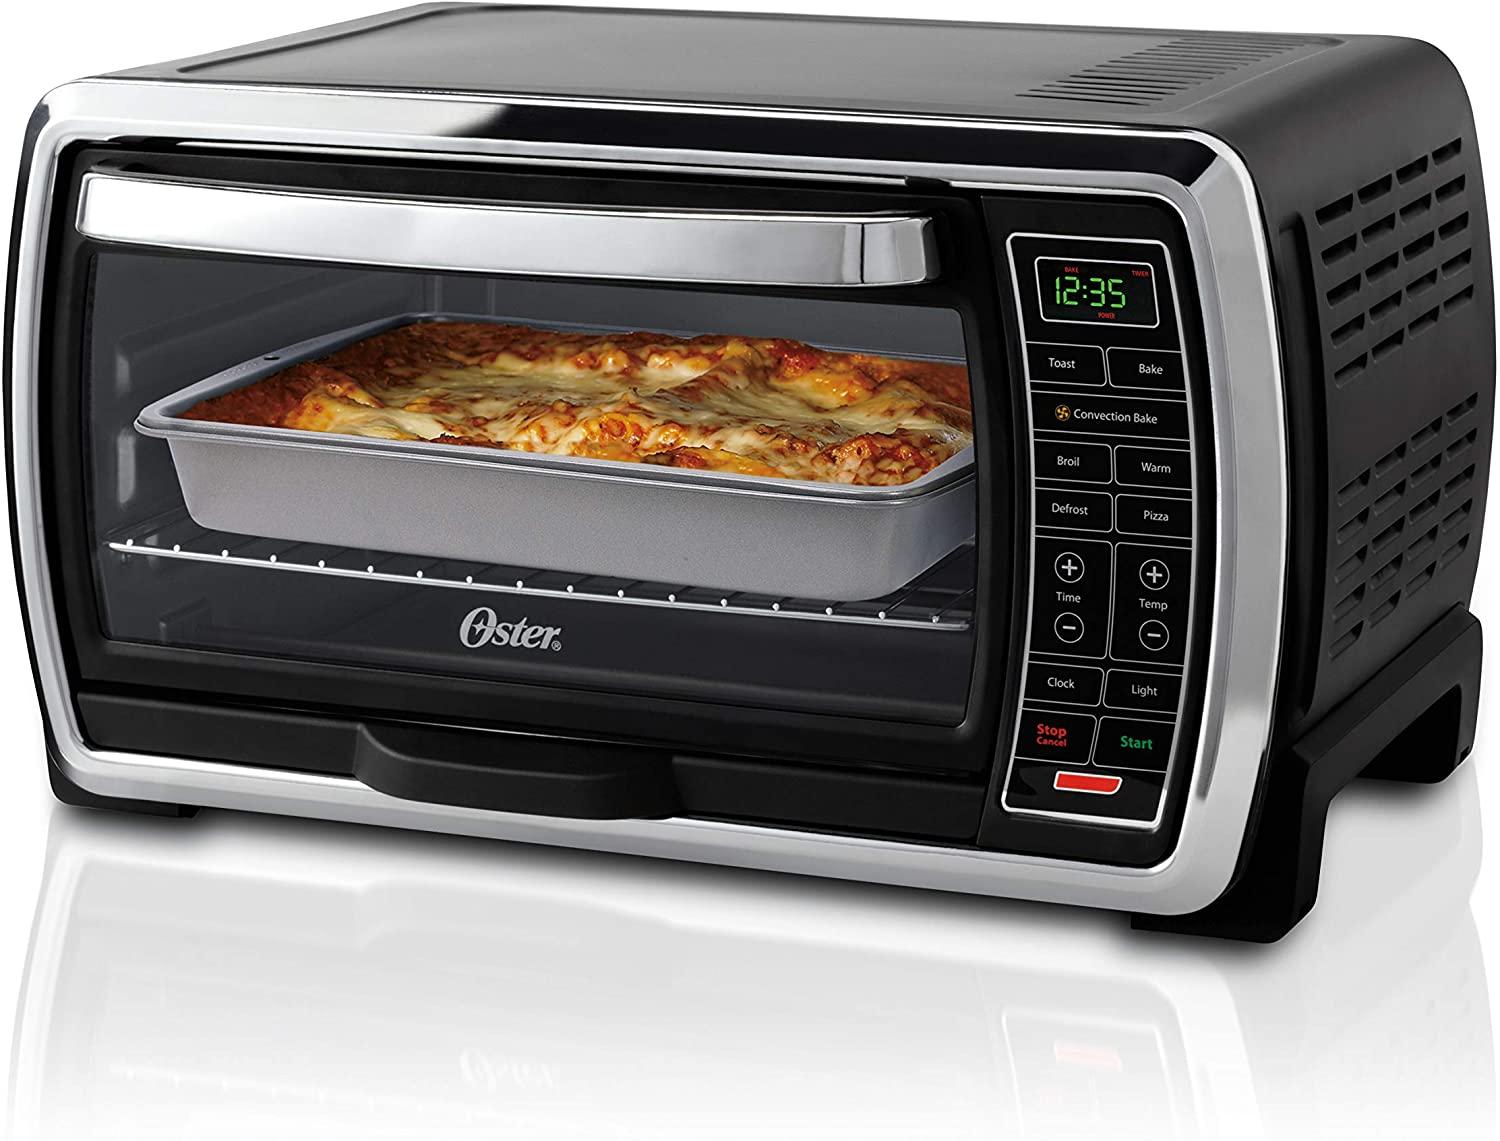 Oster Toaster Digital Convection Oven for $72.99 Shipped